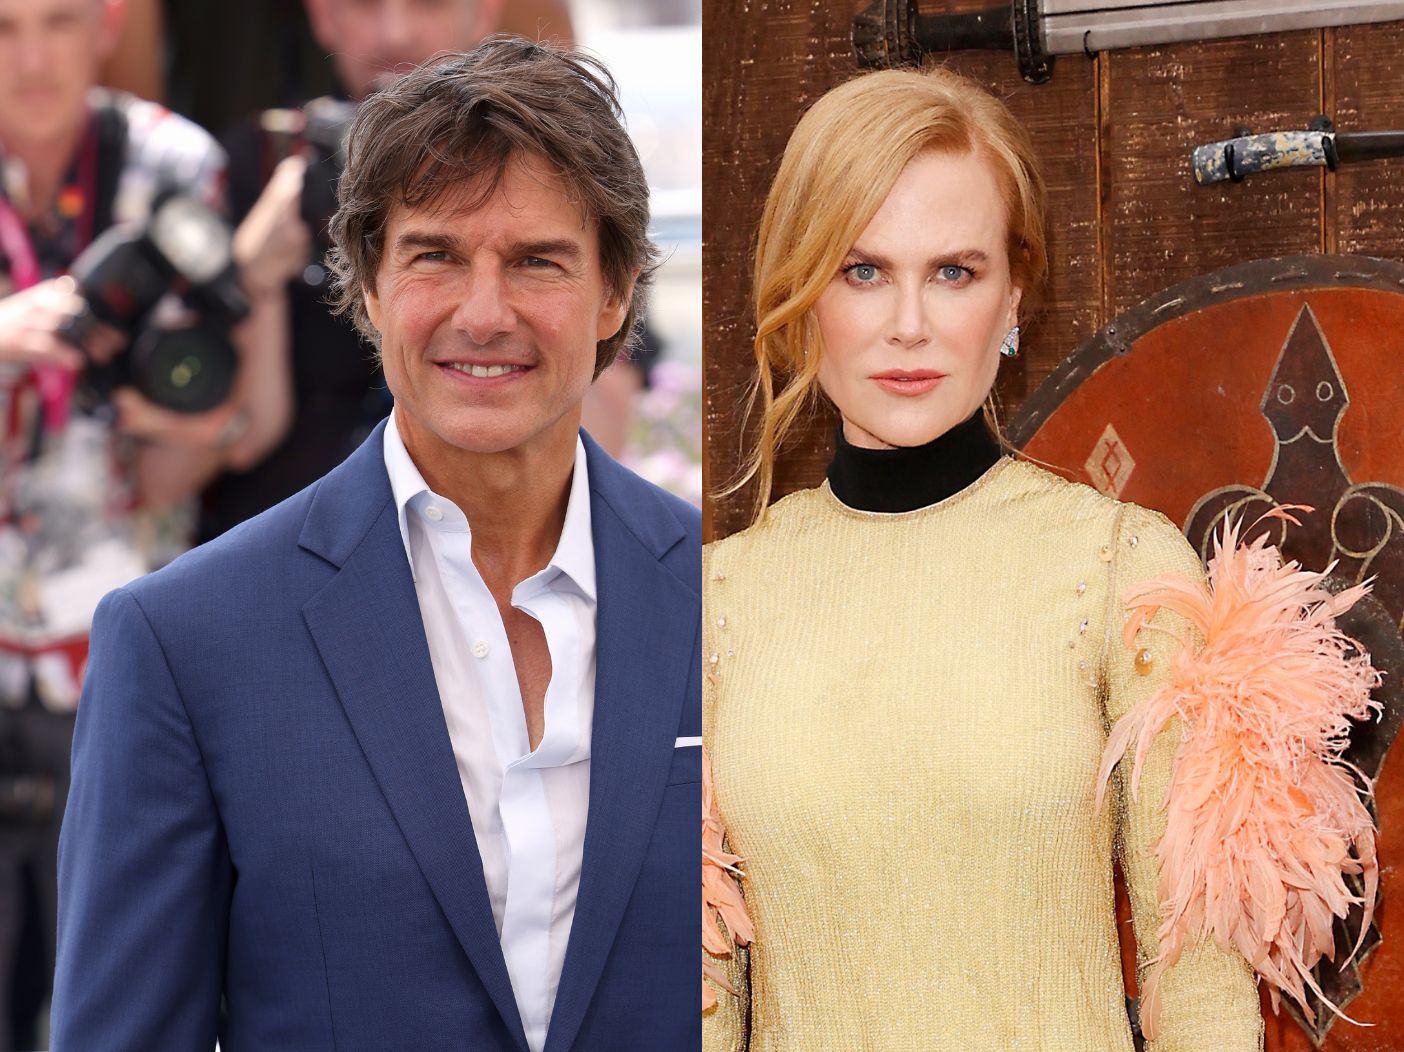 Tom Cruise Allegedly Insulted Nicole Kidman, Supposedly Renewed Bad Blood With Ex-Wife, Dubious Gossip Says